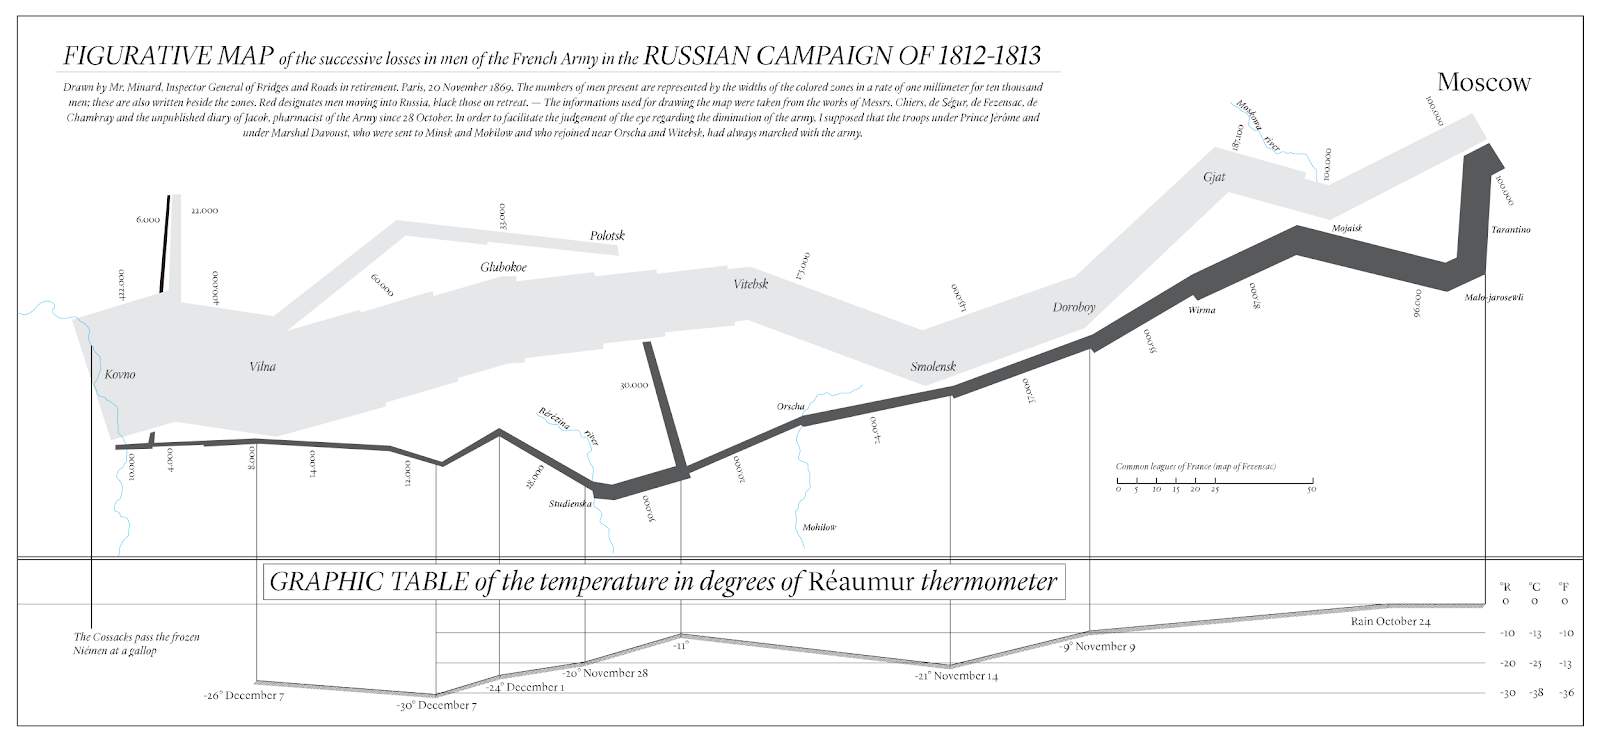 FIGURATIVE MAP of the successive losses in men of the French Army in the RUSSIAN CAMPAIGN OF 1812-1813